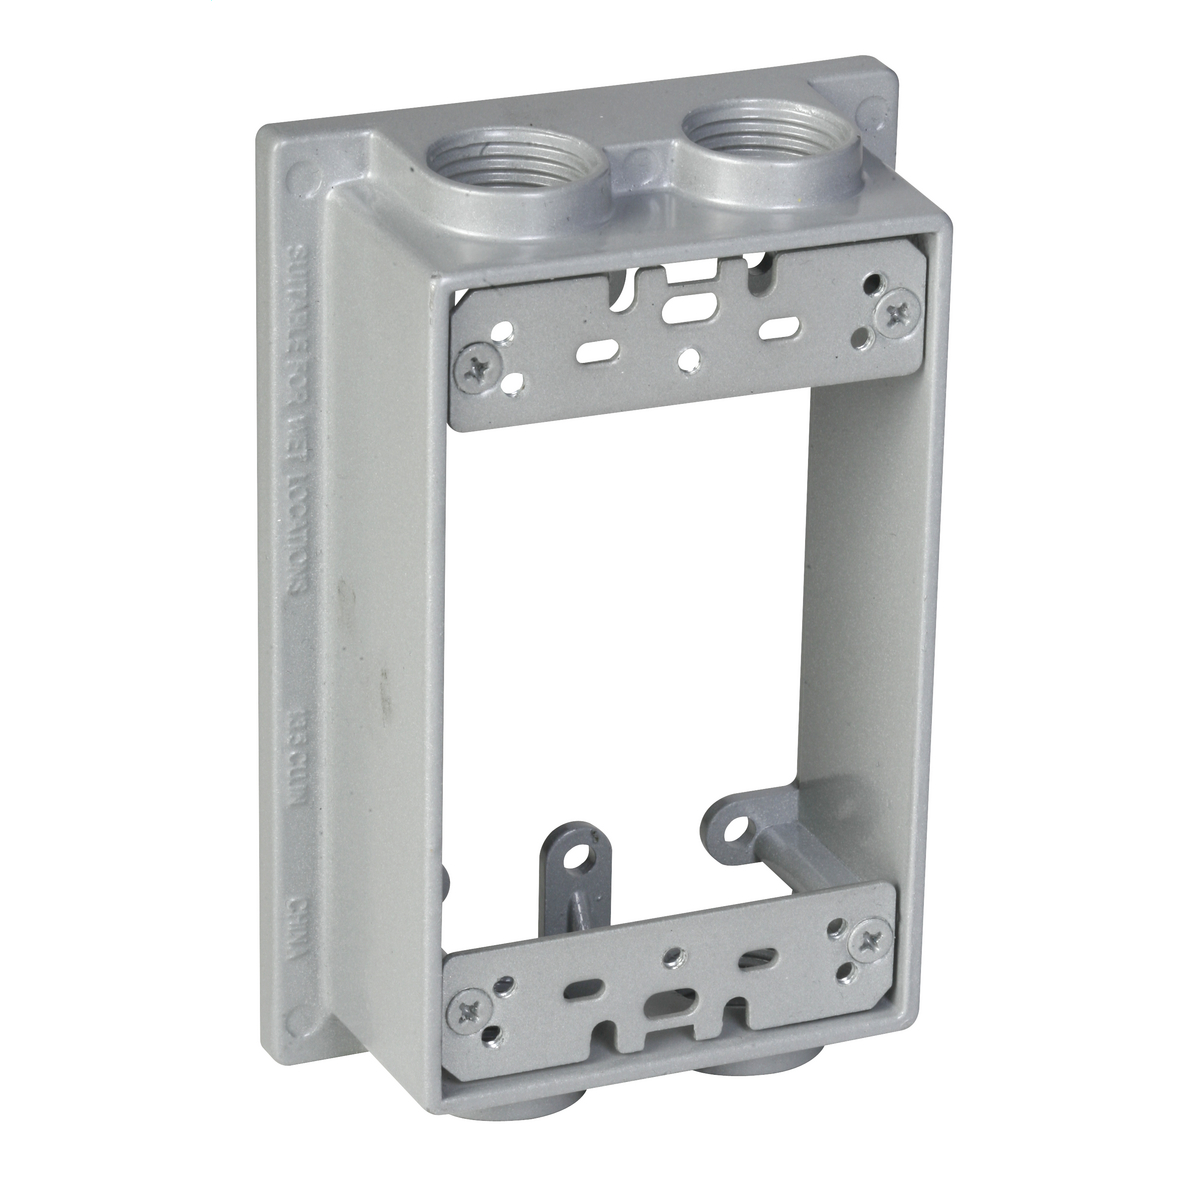 3 Closure Plugs 4 Round Gray Morris Products 36720 Weatherproof Extension 4 Outlet Holes 3/4 Outlet Hole Diameter 